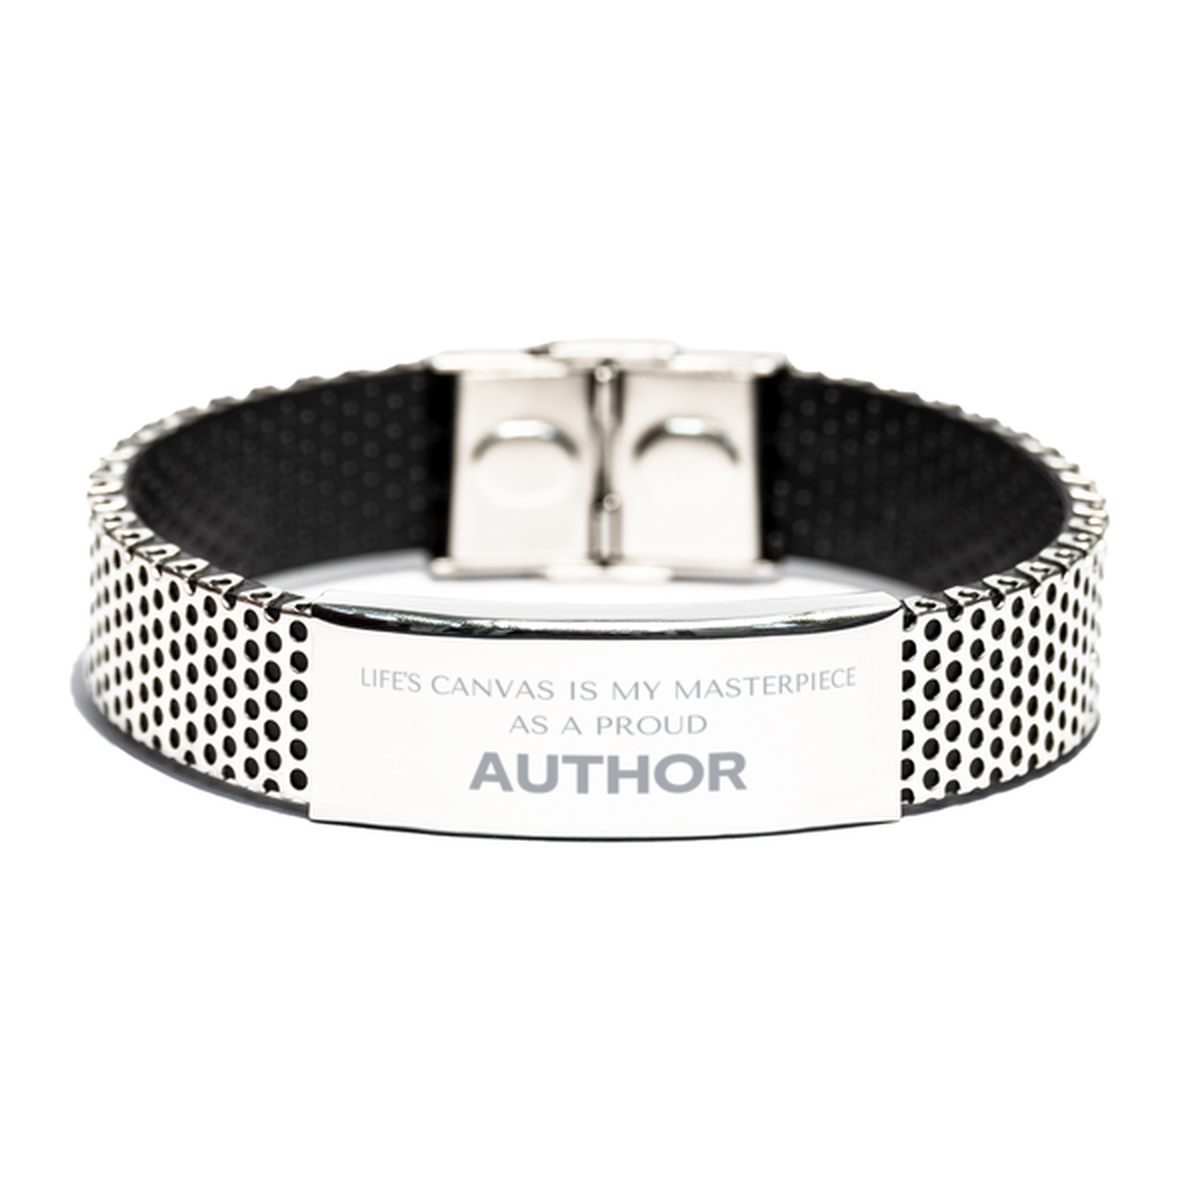 Proud Author Gifts, Life's canvas is my masterpiece, Epic Birthday Christmas Unique Stainless Steel Bracelet For Author, Coworkers, Men, Women, Friends